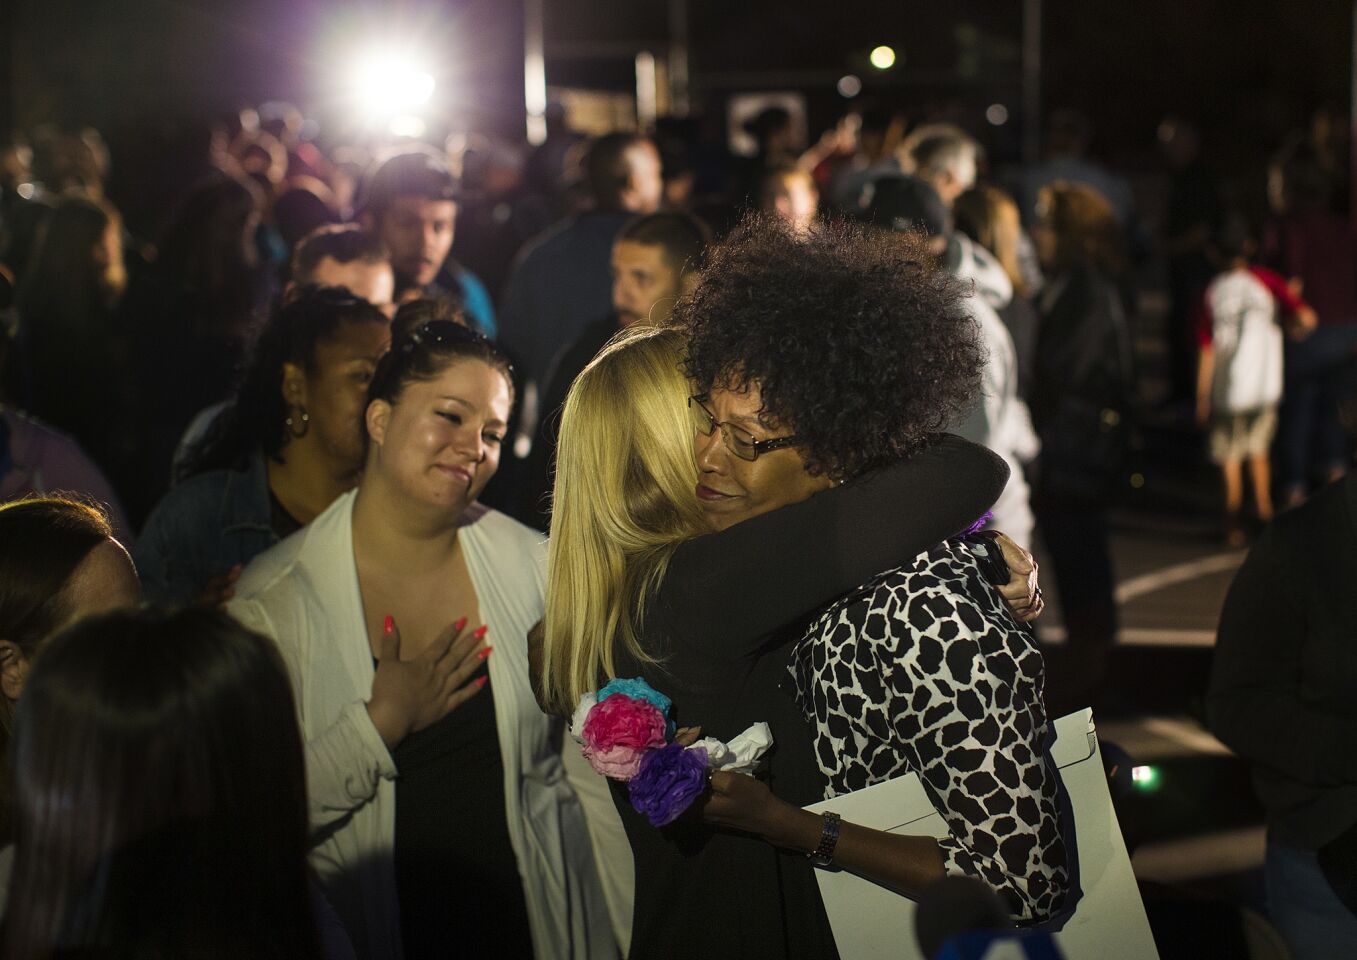 North Park Elementary School Principal Yadira Downing is comforted after the candlelight prayer vigil on the school's playground.